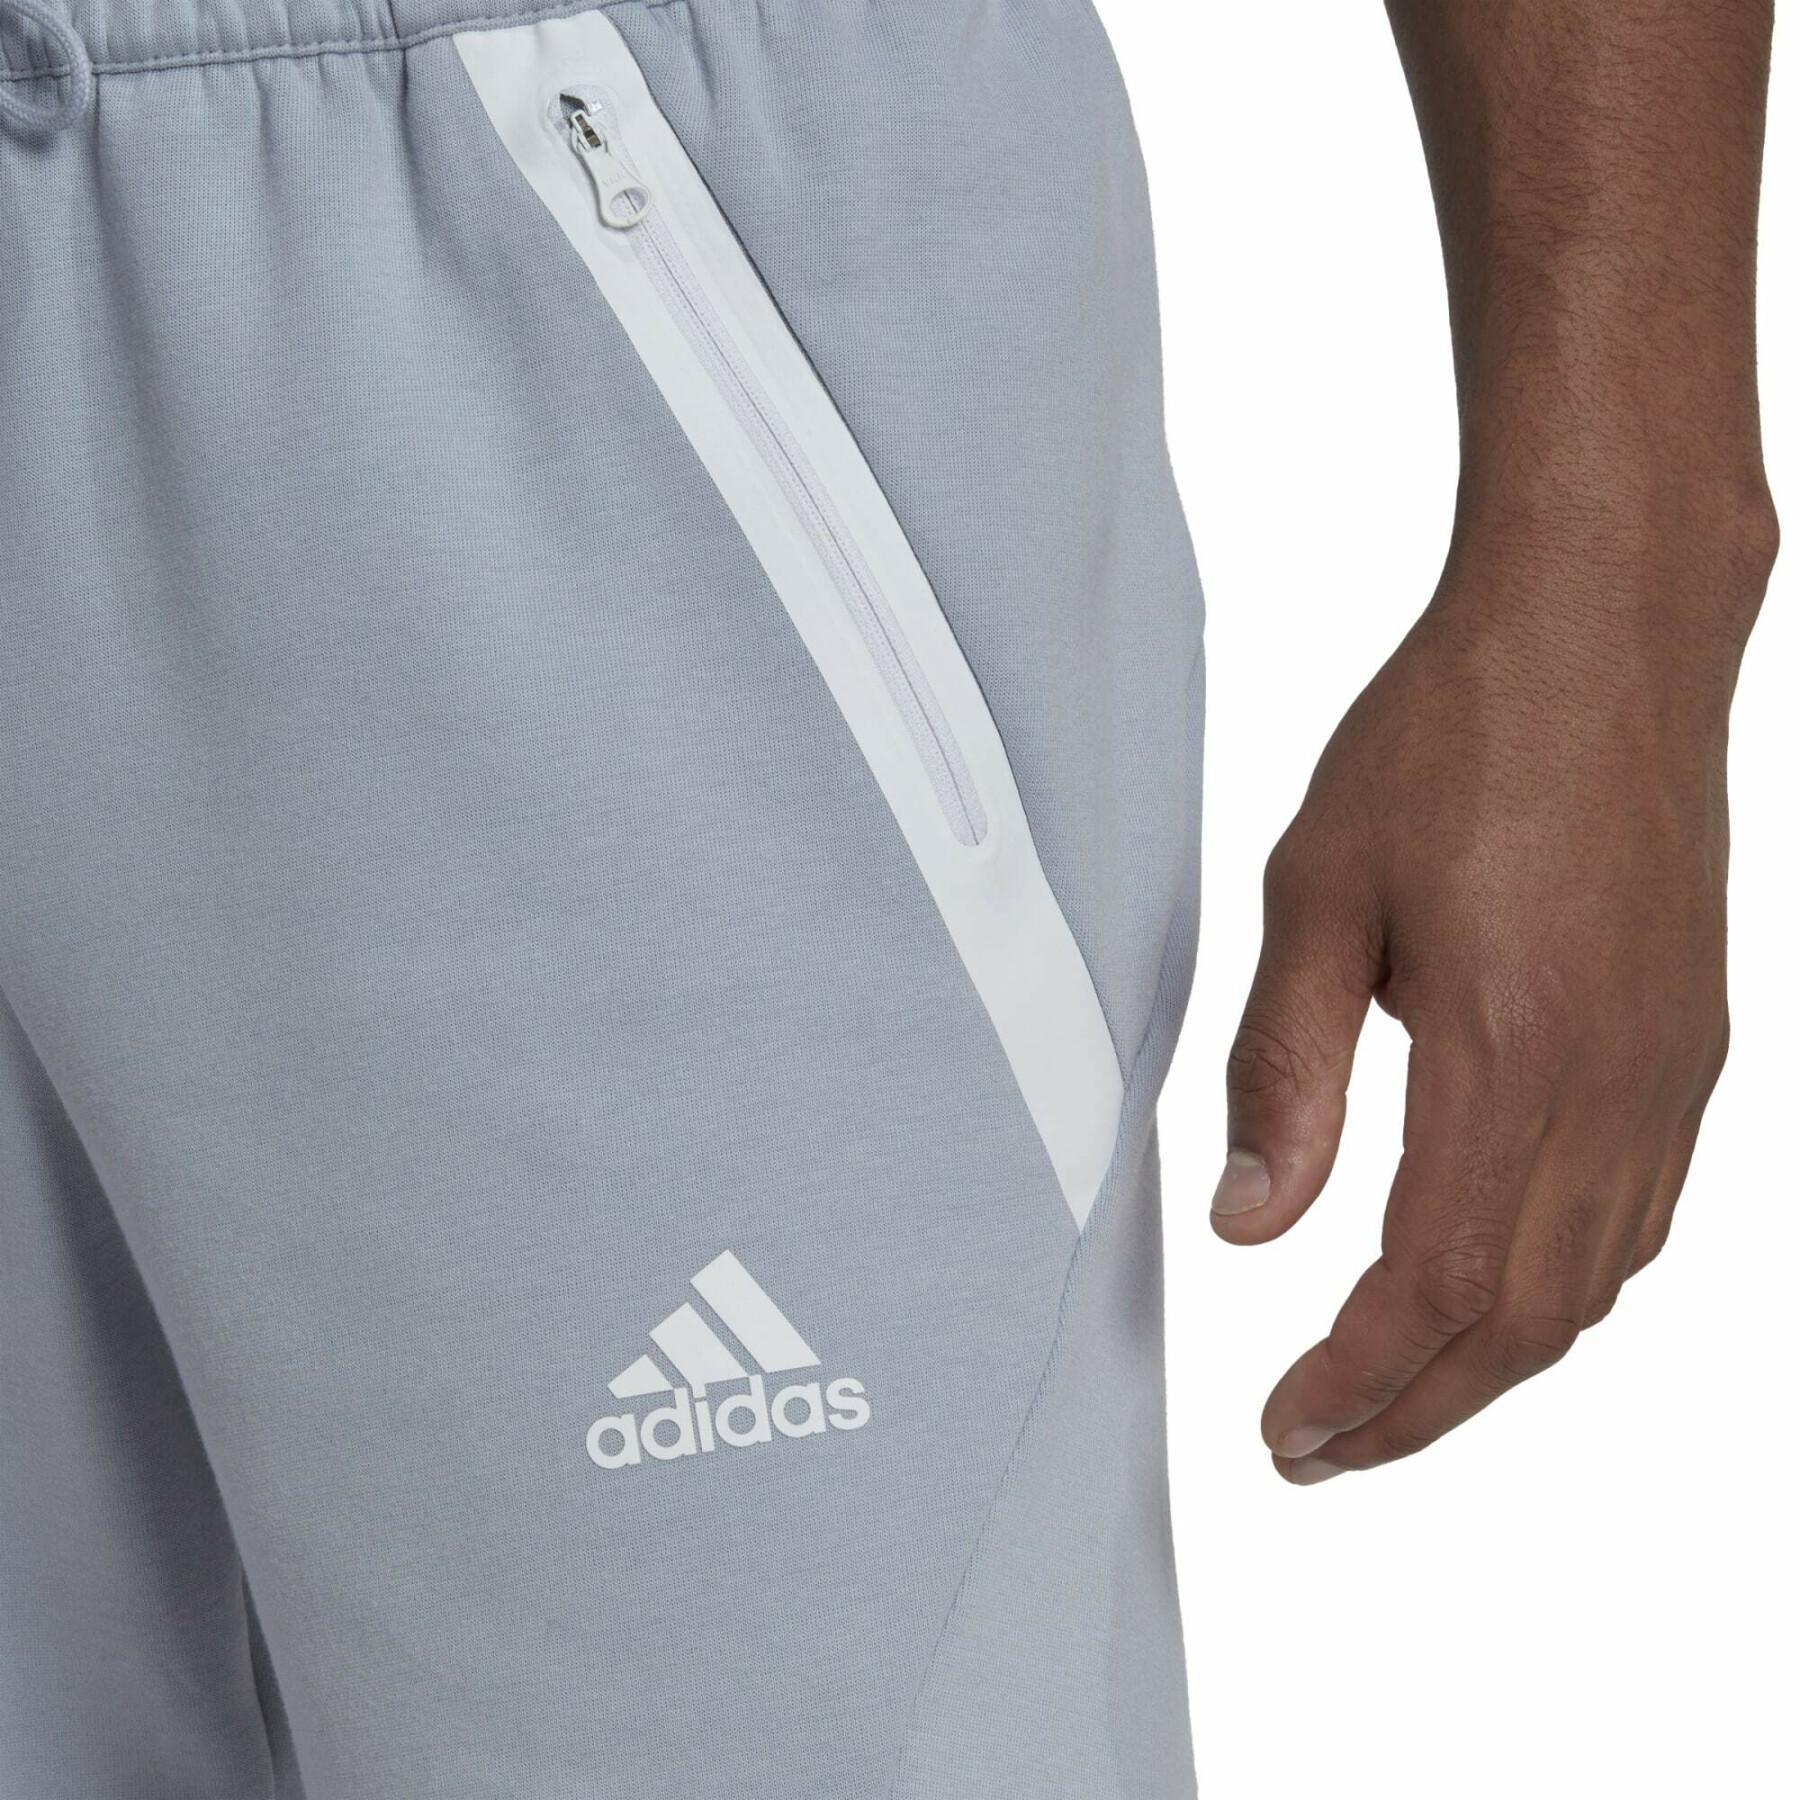 Joggers adidas Designed for Gameday